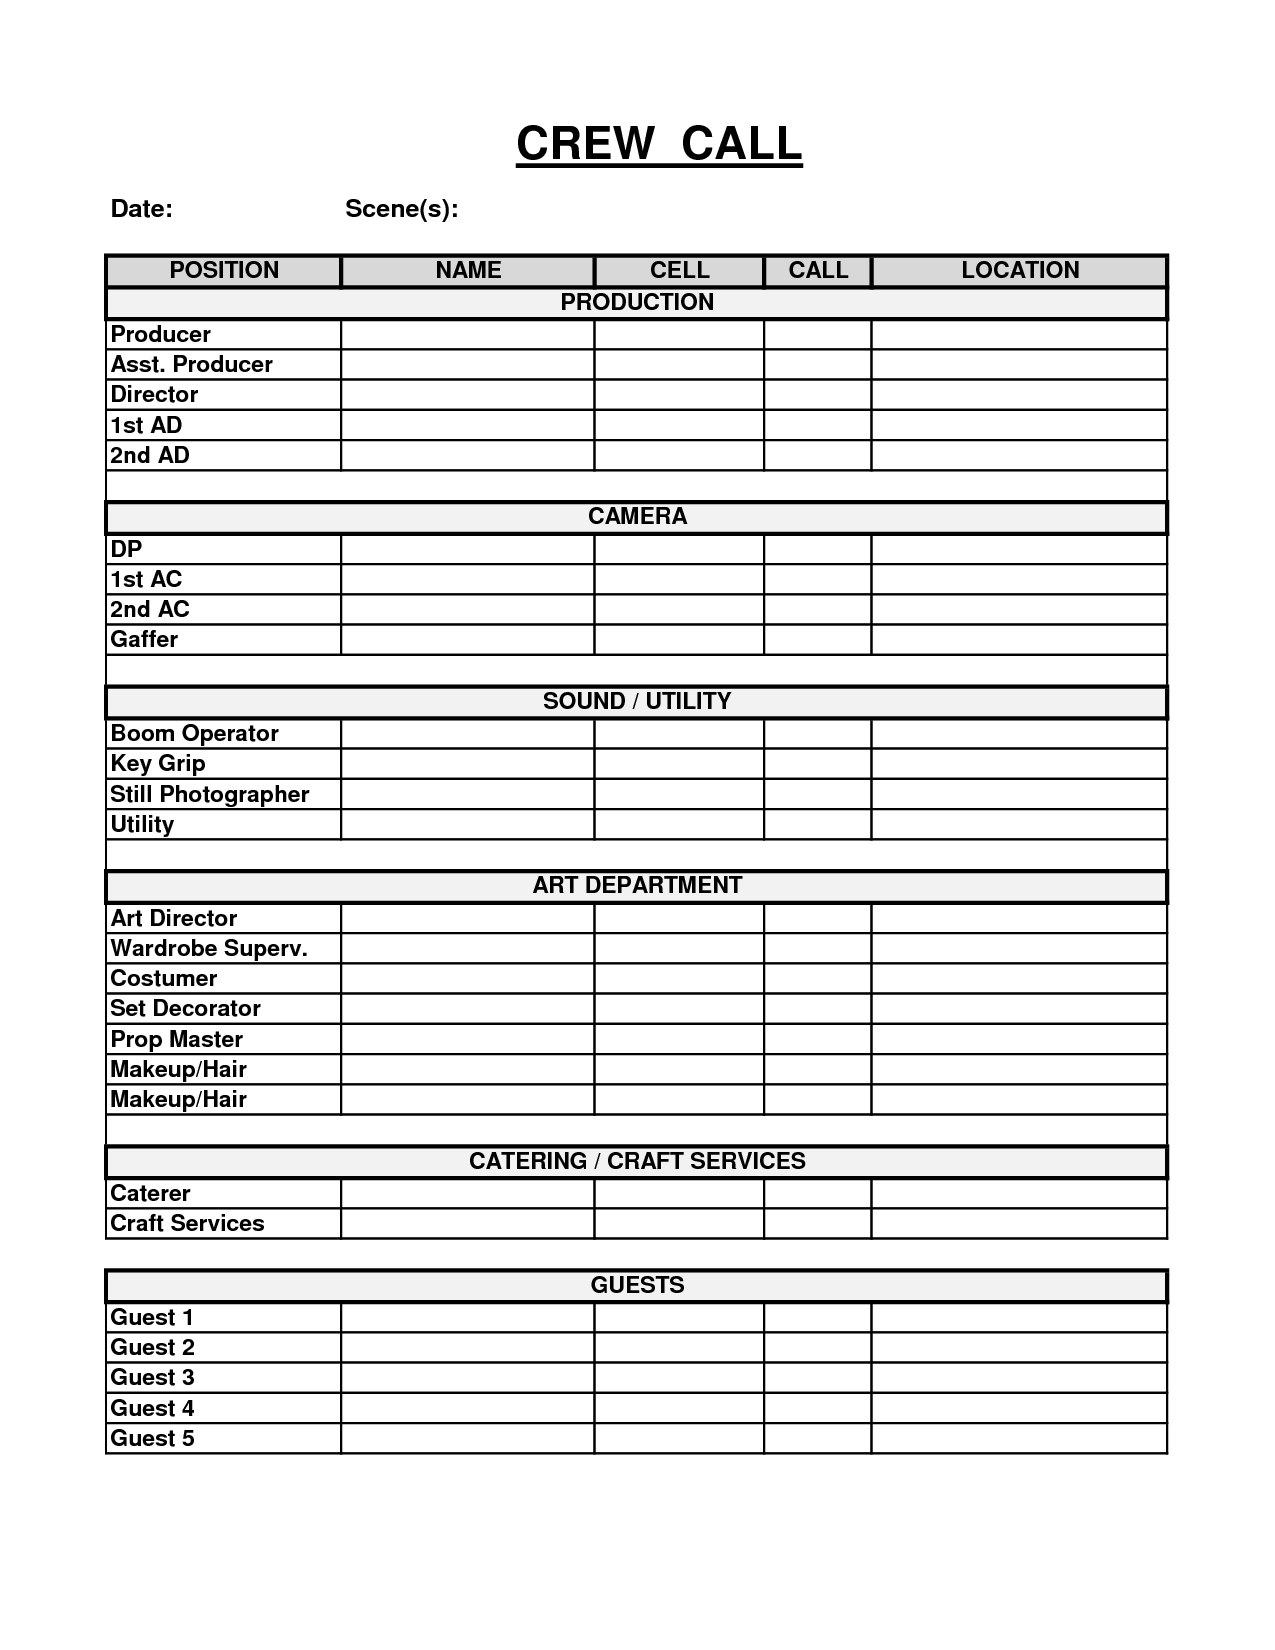 Easy To Use Crew Call And Call Sheet Template Sample : V M D Throughout Film Call Sheet Template Word